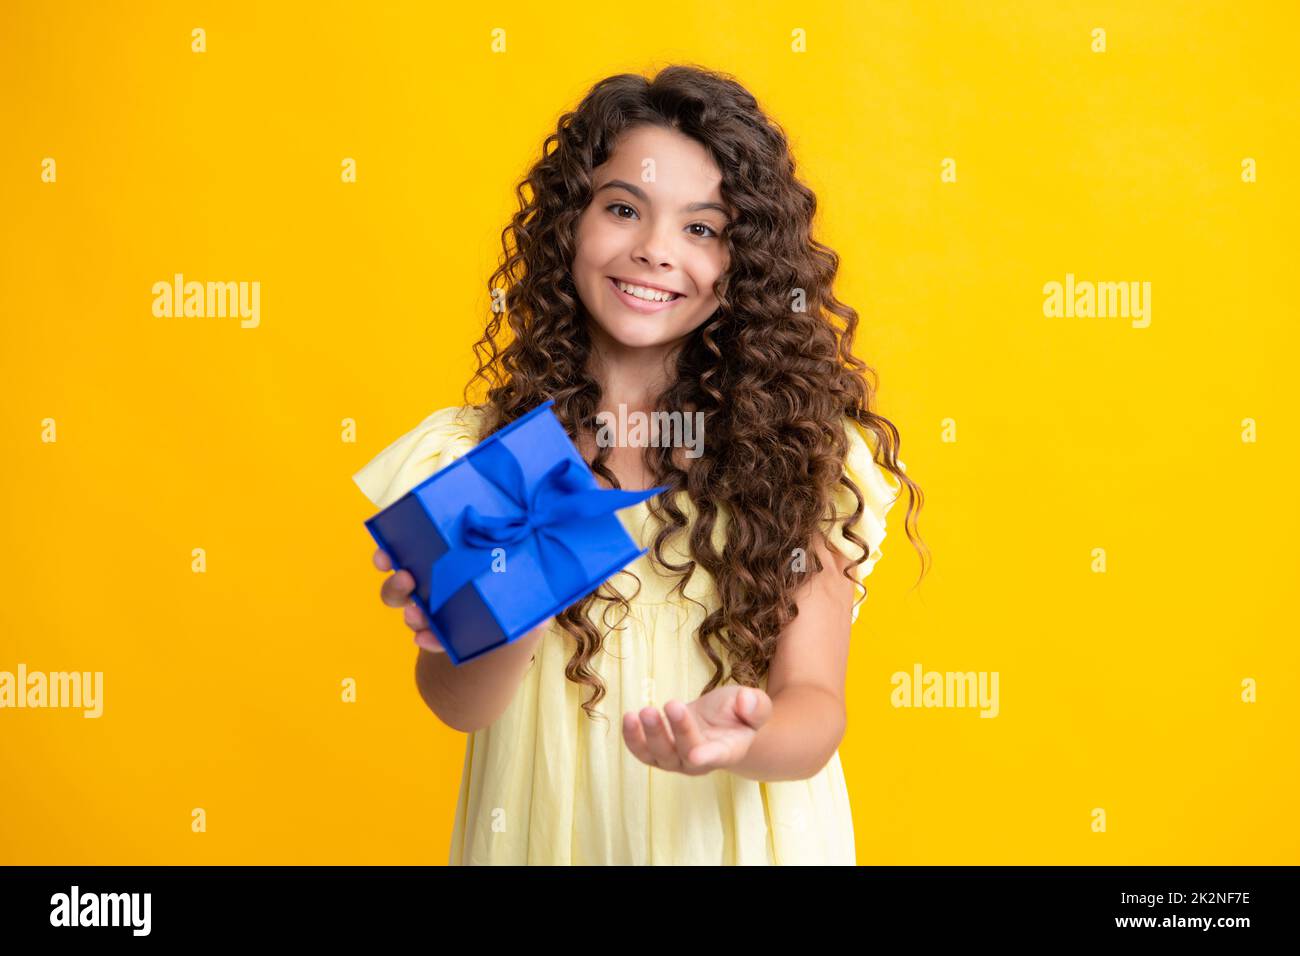 Happy teenager portrait. Child with gift present box on isolated background. Presents for birthday, Valentines day, New Year or Christmas. Smiling Stock Photo